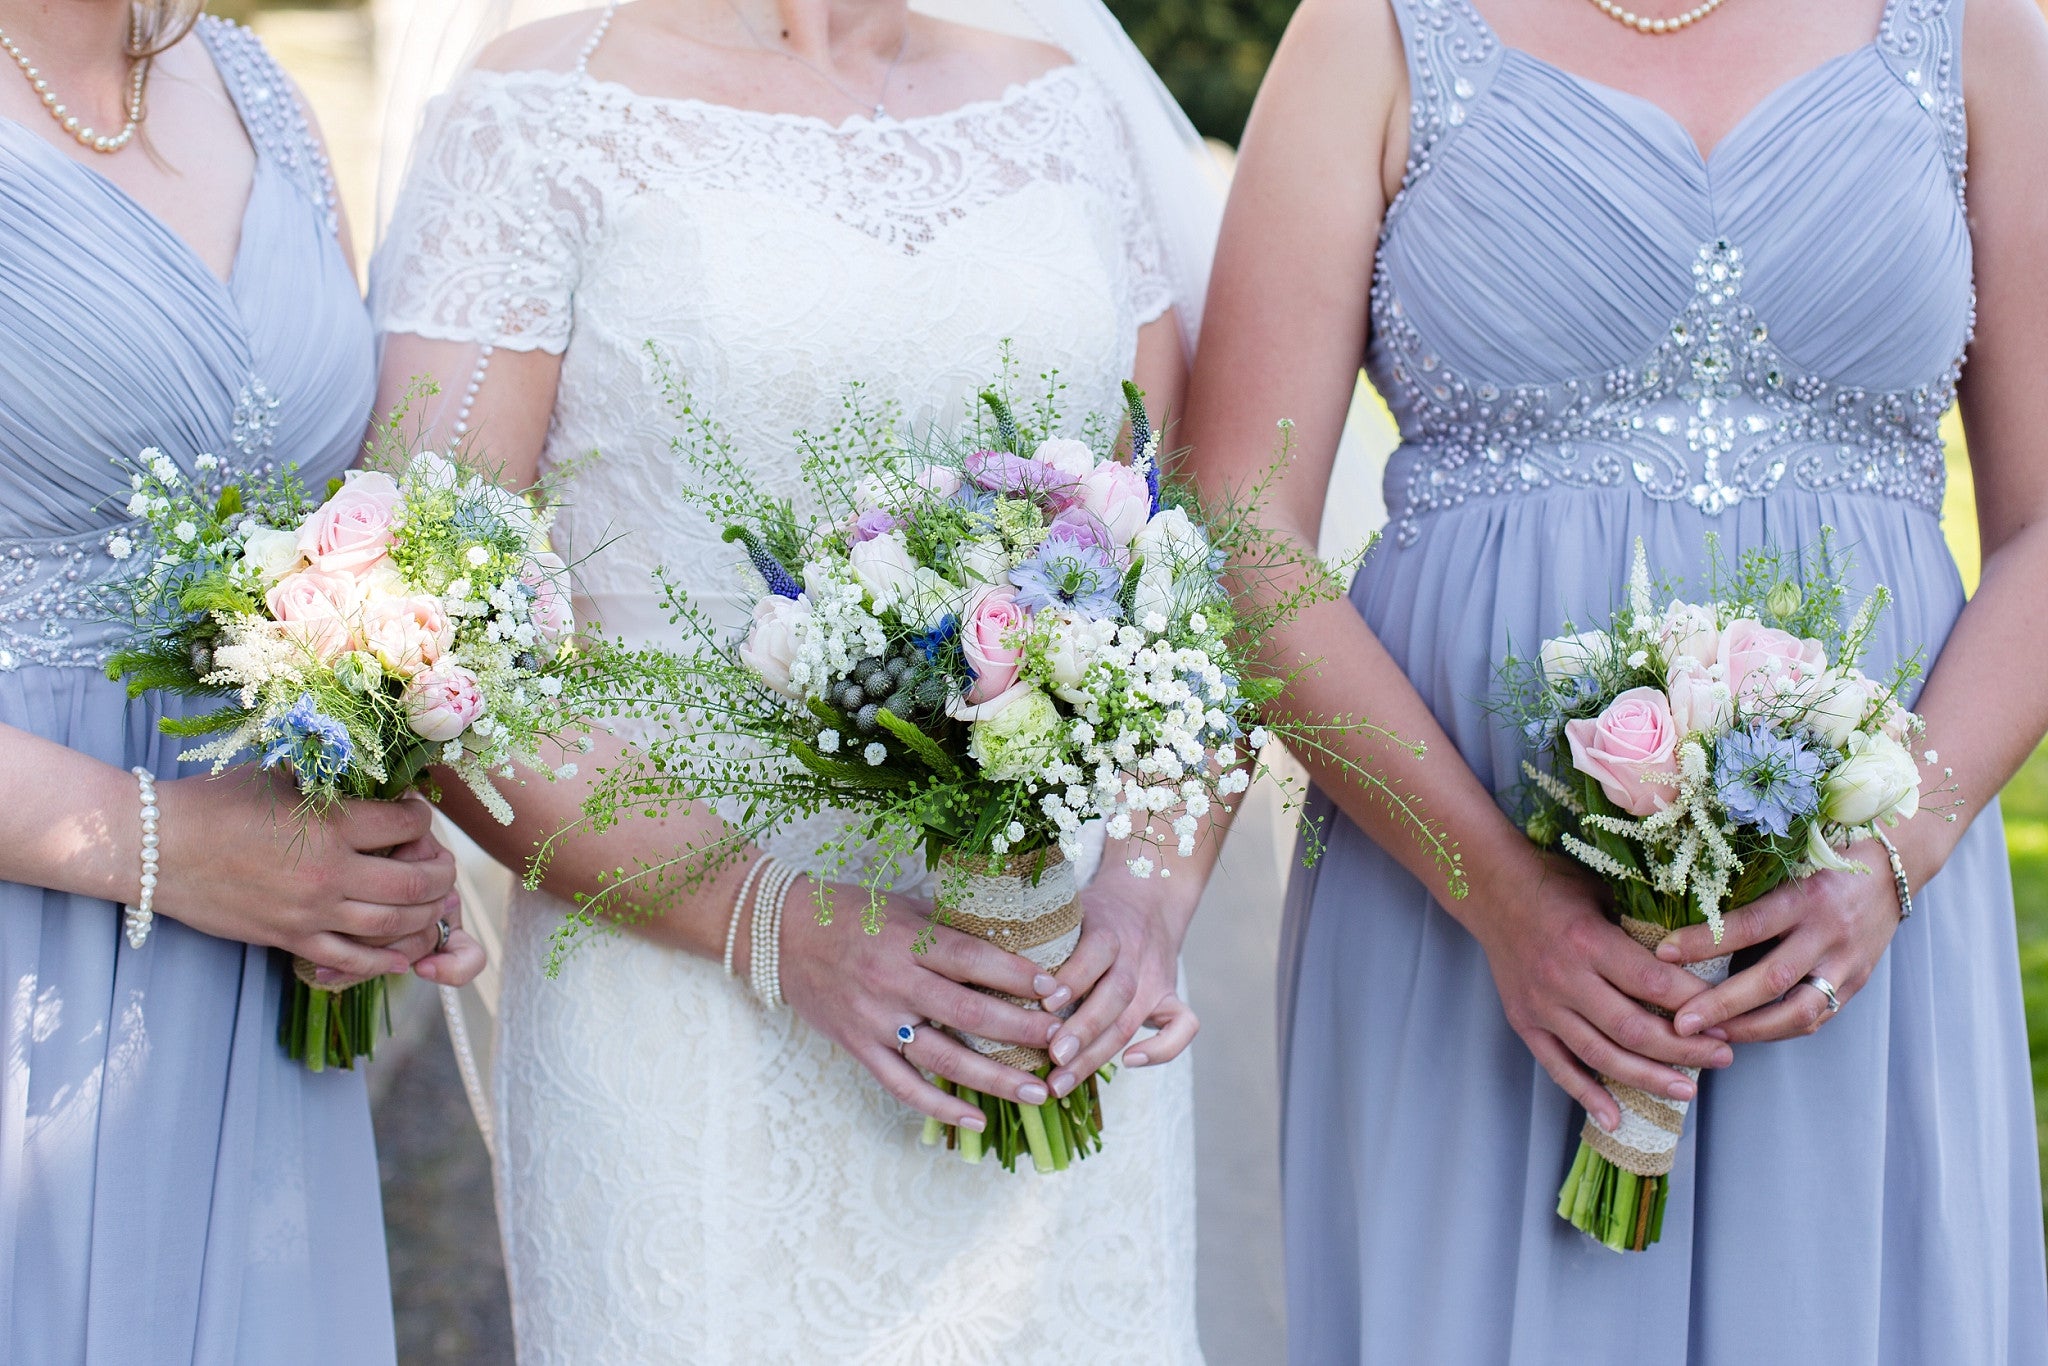 Bride and Bridesmaid's with wedding flower bouquets in shades of pink, cream and blue.